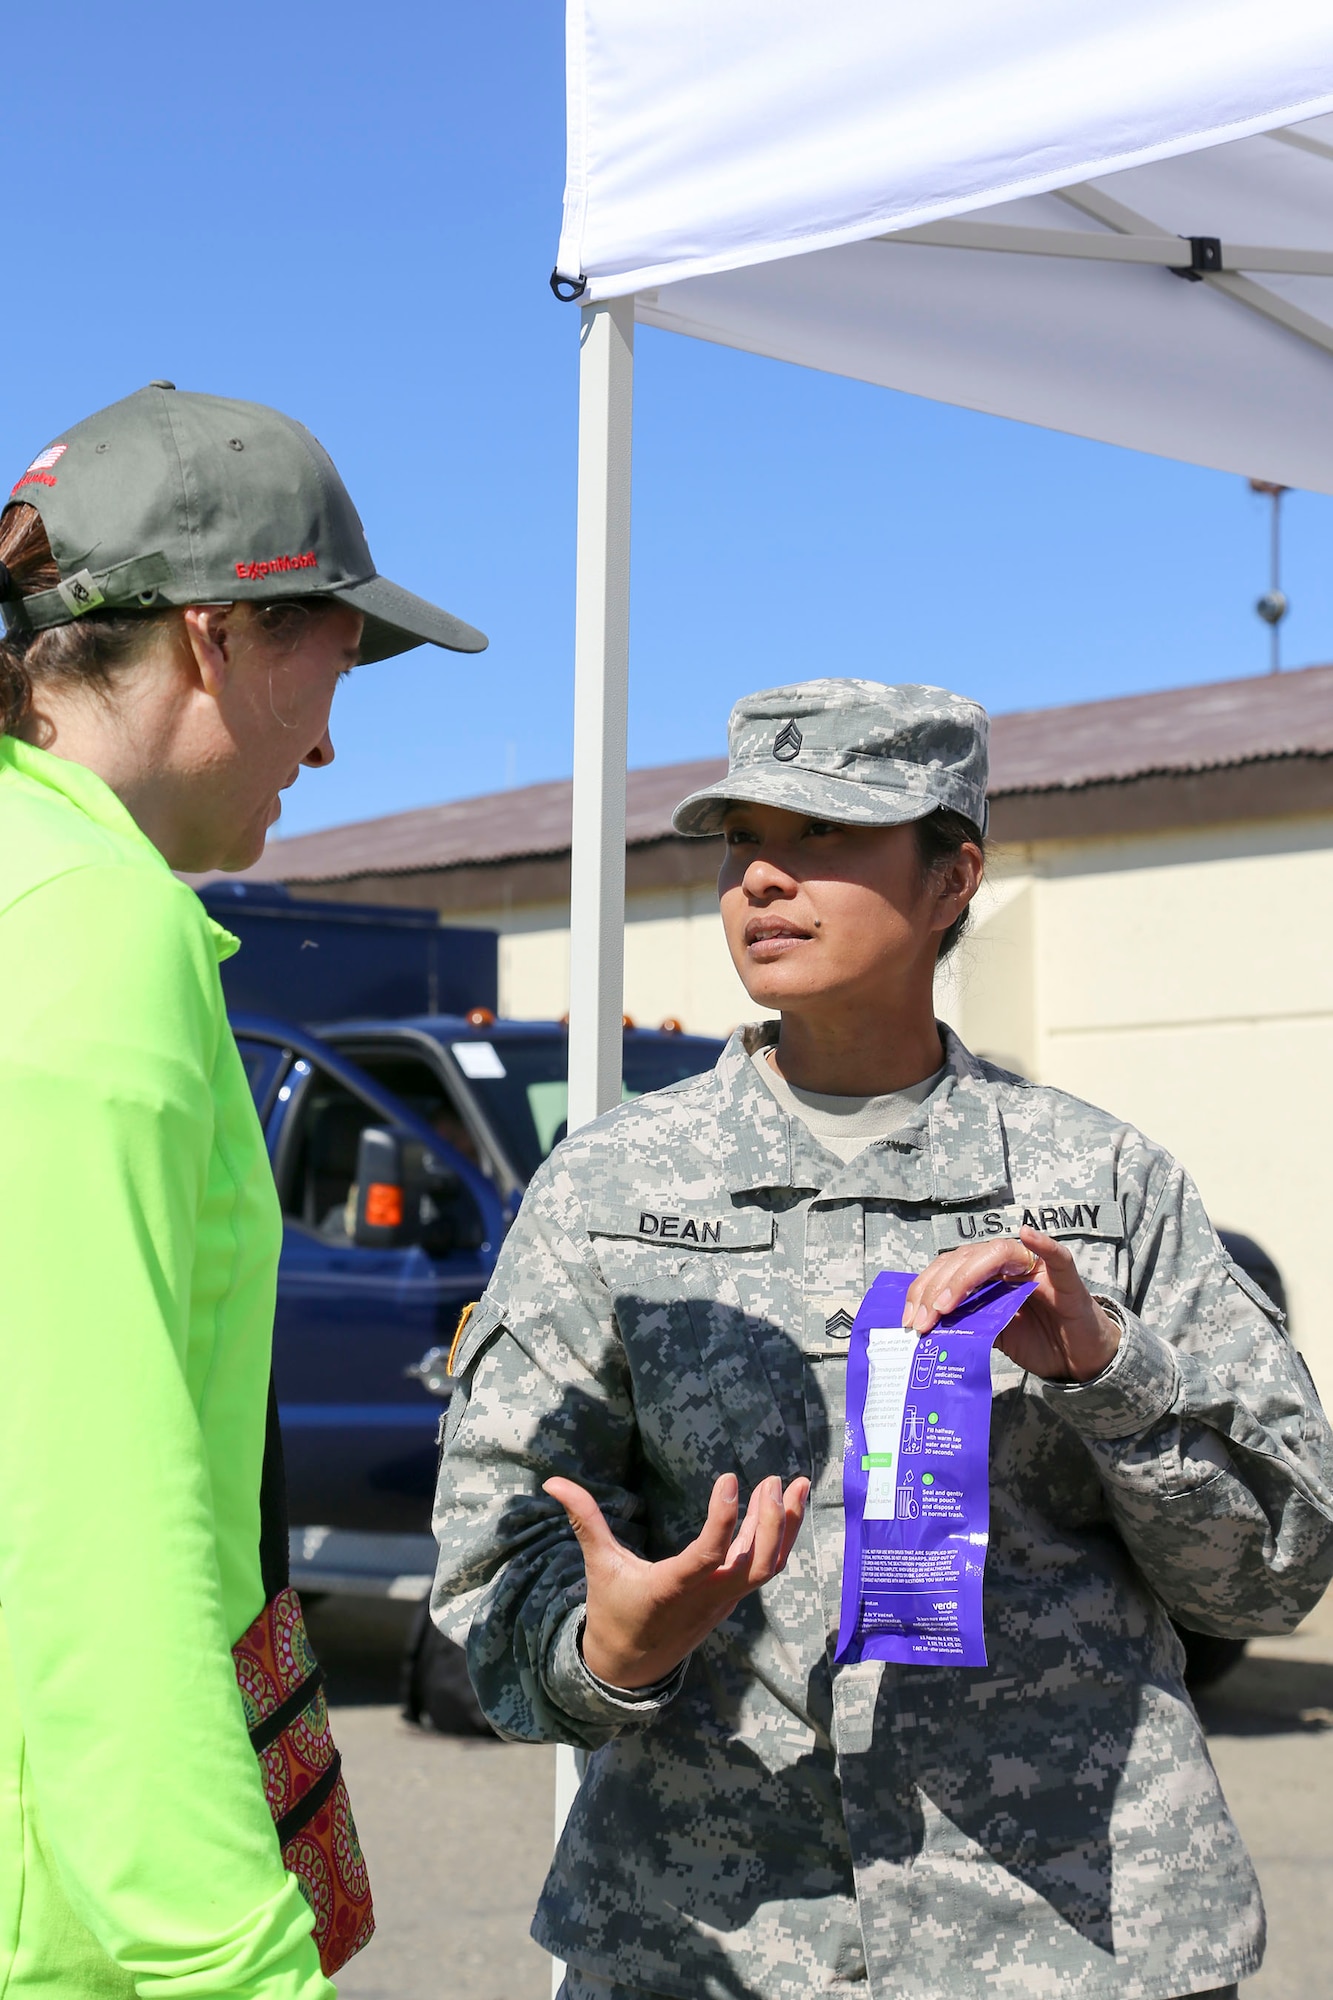 Alaska National Guard Staff Sgt. Joyce Dean, the Counterdrug Support Program noncommissioned officer-in-charge, discusses how to use a drug disposal kit with a local resident at the Edward G. Pitka Sr. Airport in Galena, Alaska, May 31, 2017. The CDSP presented the goggles, a tool used to demonstrate alcohol or drug impairment, and provided drug and alcohol education and prevention materials to local residents during a recent civil operations mission in the Yukon-Koyukuk Region. (U.S. Army National Guard photo by Staff Sgt. Balinda O’Neal Dresel)